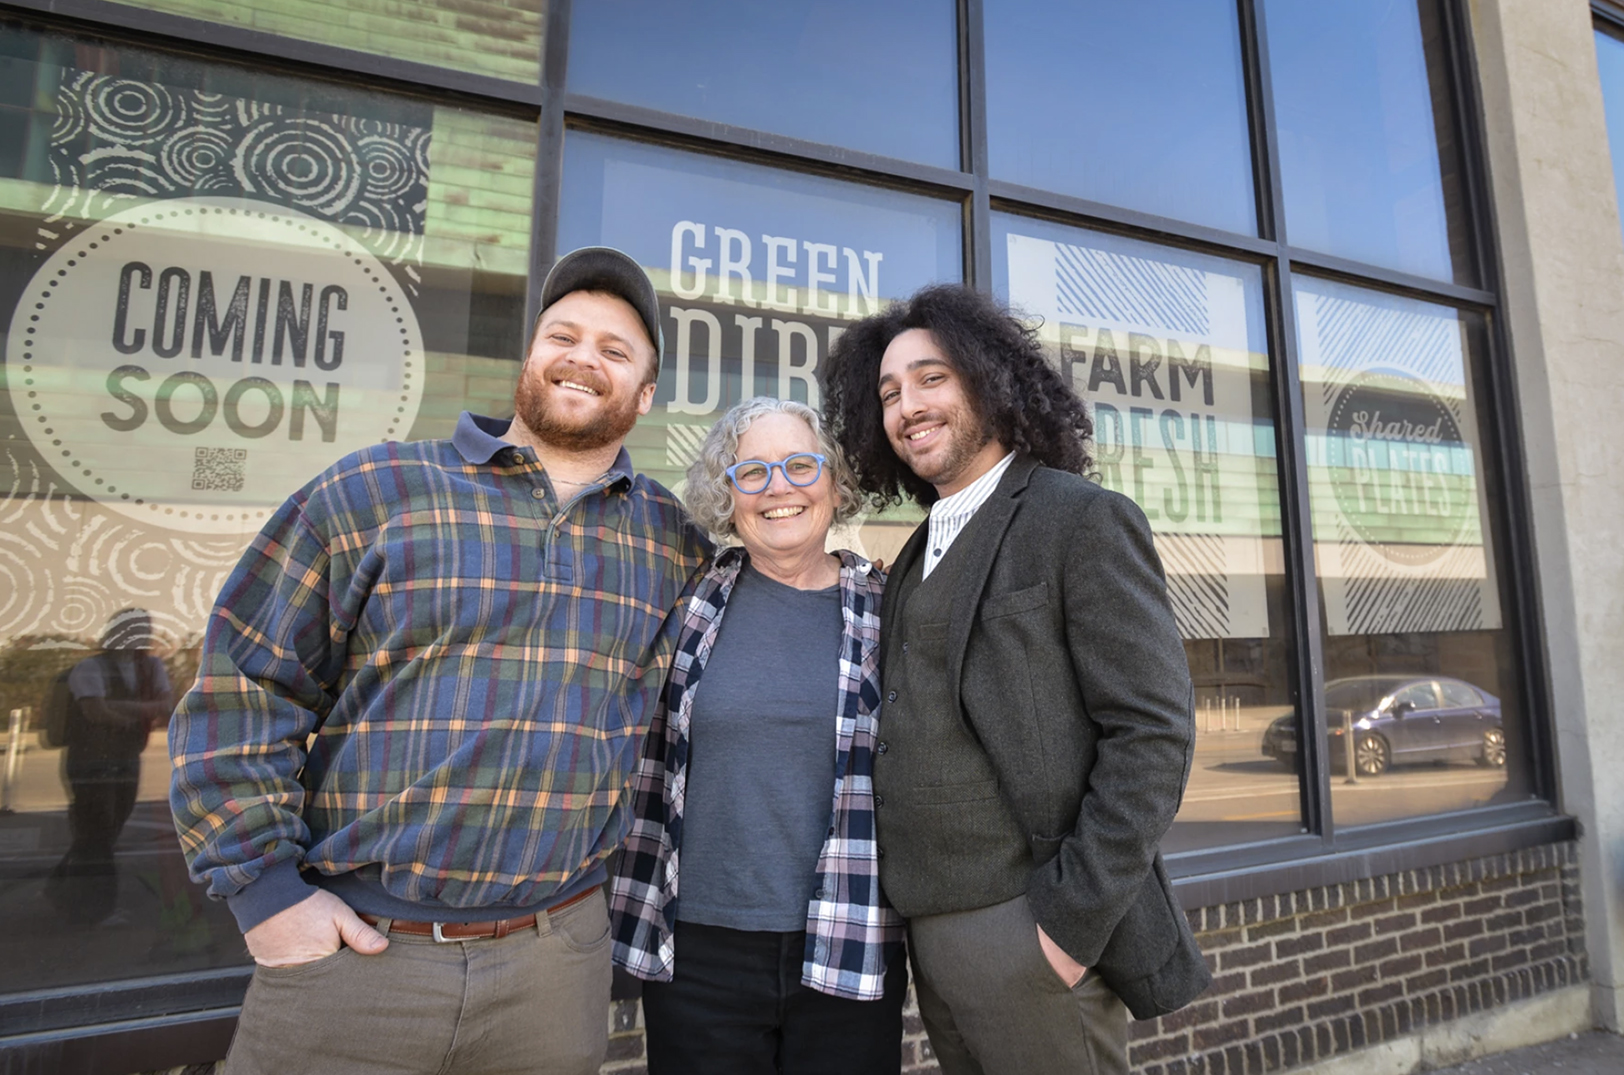 KC’s cheesemakers Green Dirt Farm opening new space in embattled Crossroads